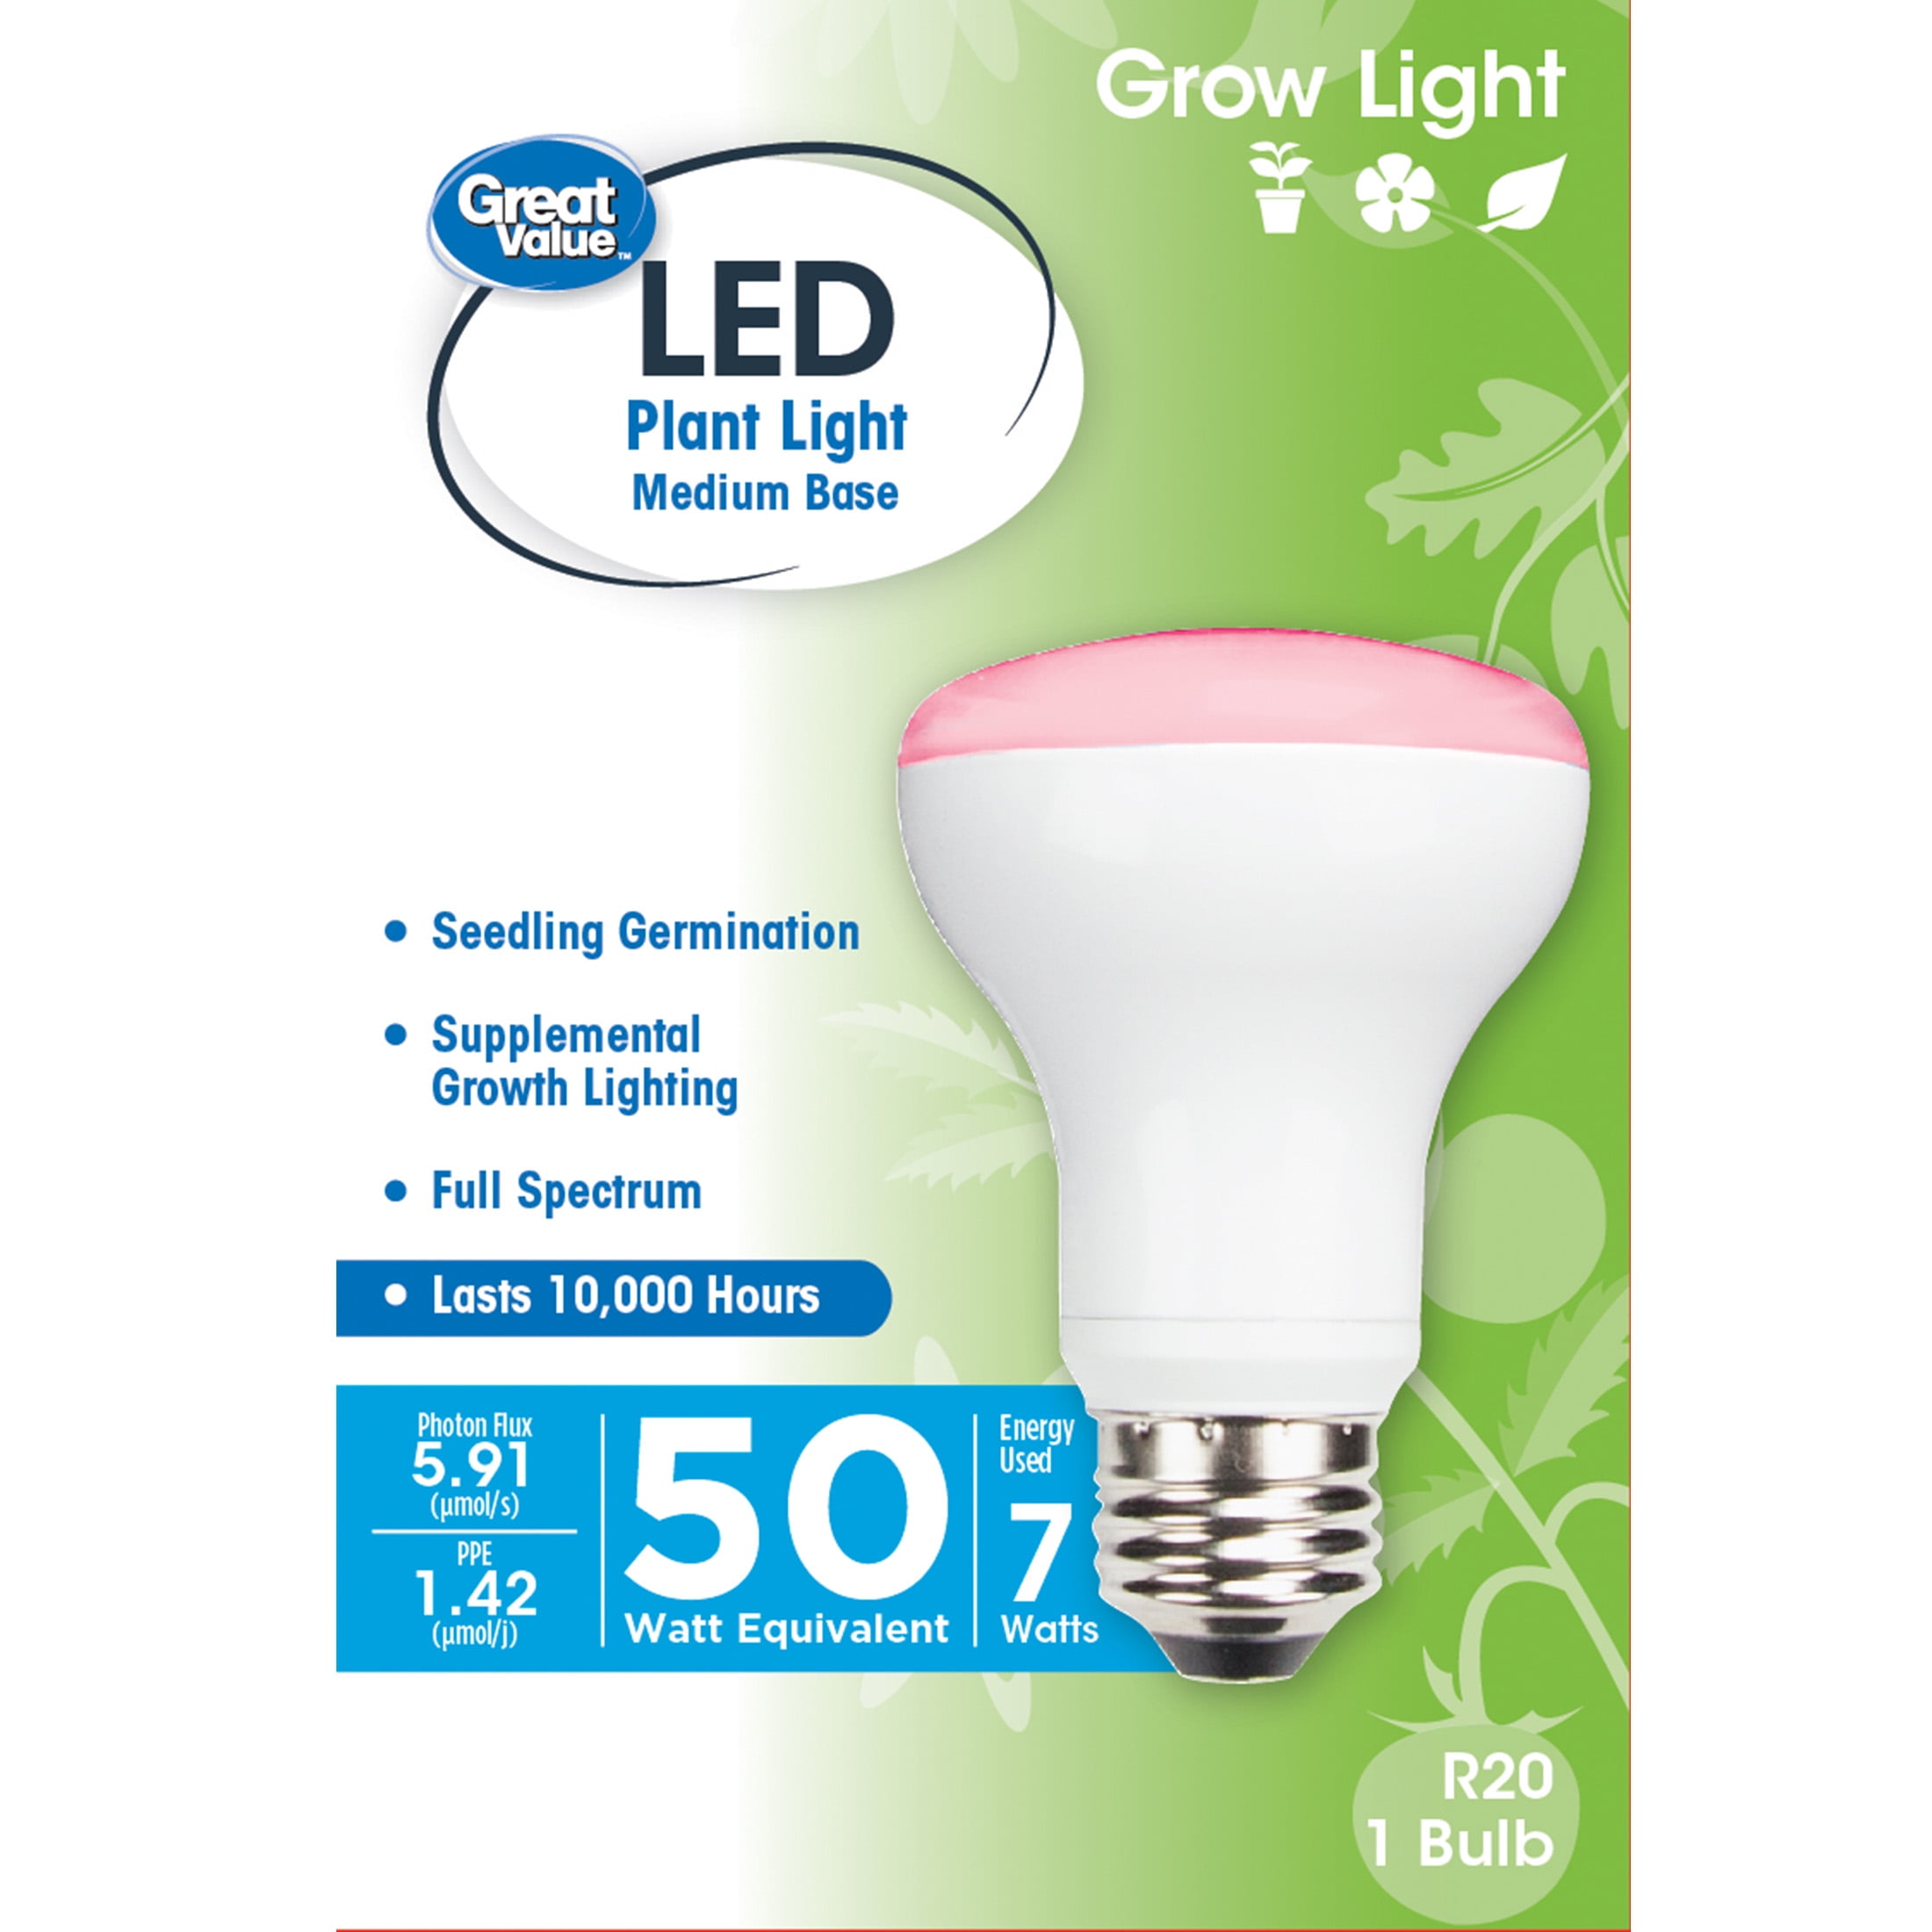 Great Value LED Light Bulb, 7W (50W Equivalent) R20 Grow Light E26 Medium Base, Non-Dimmable, Plant, 1-Pack